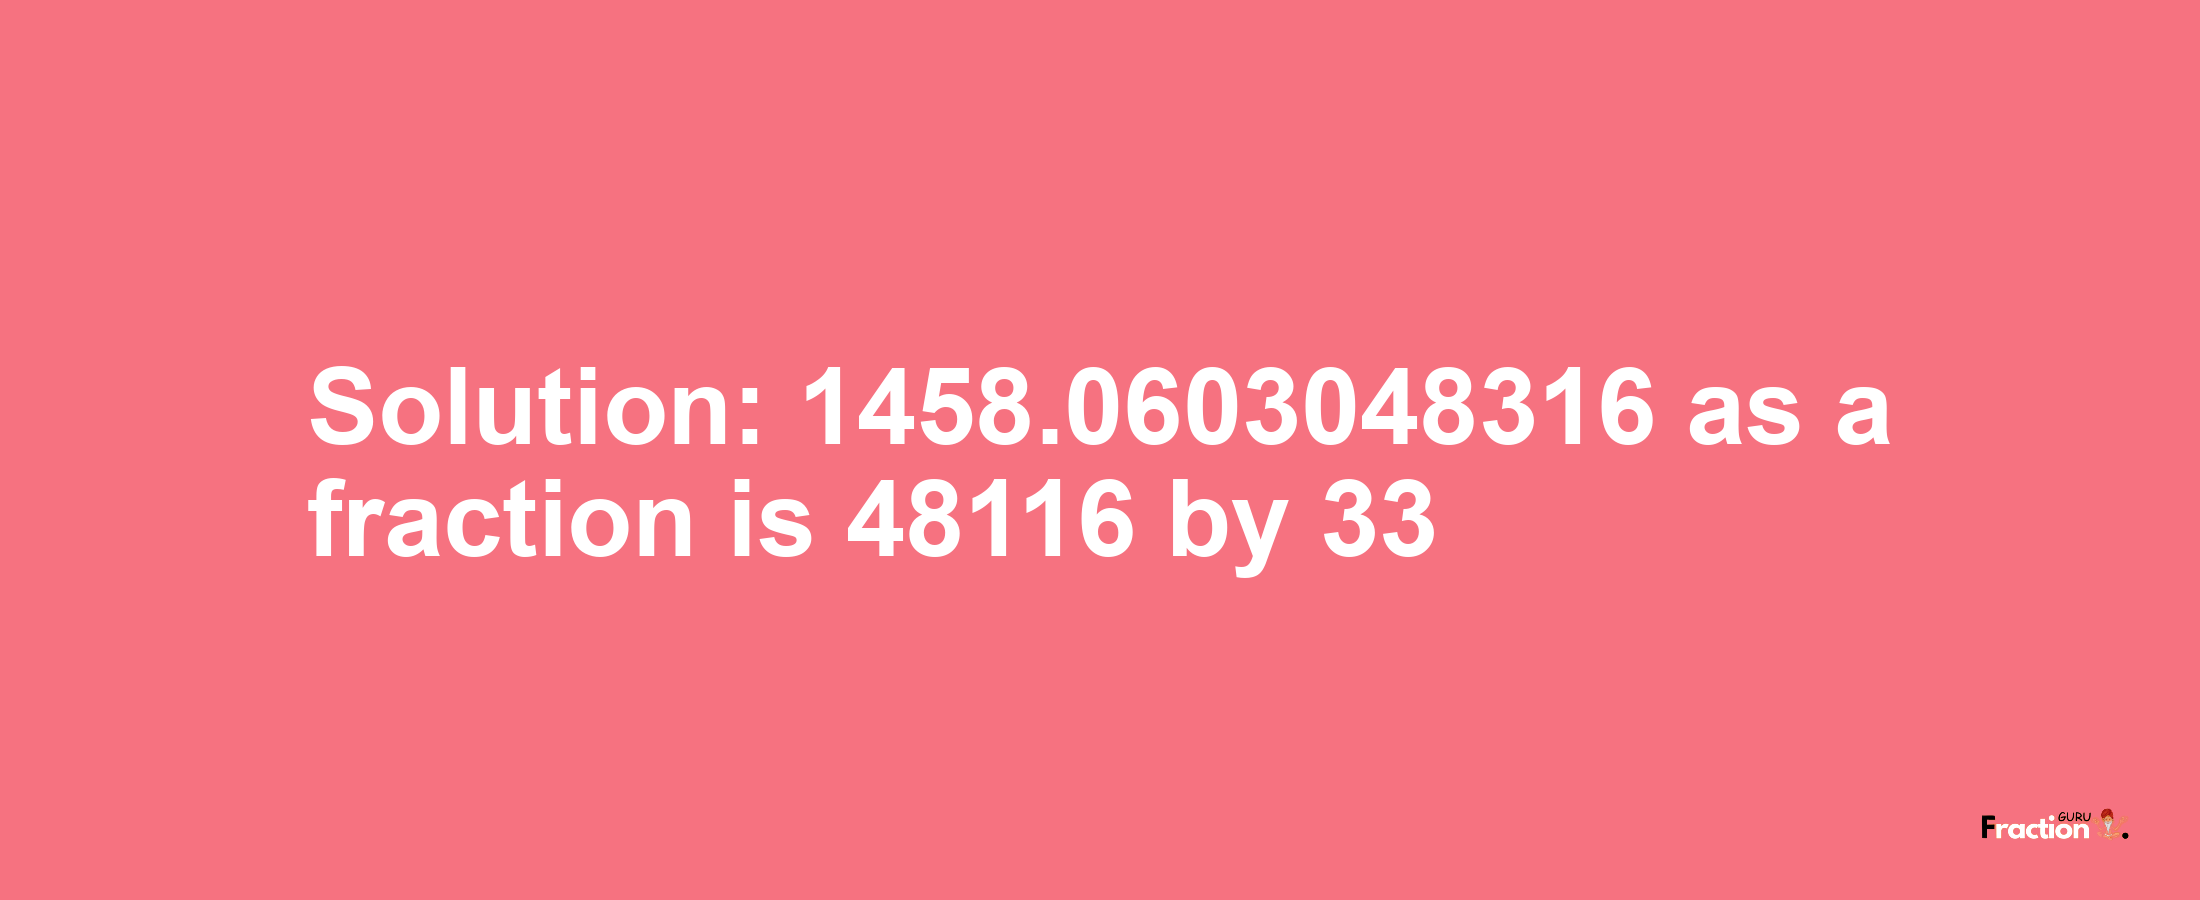 Solution:1458.0603048316 as a fraction is 48116/33